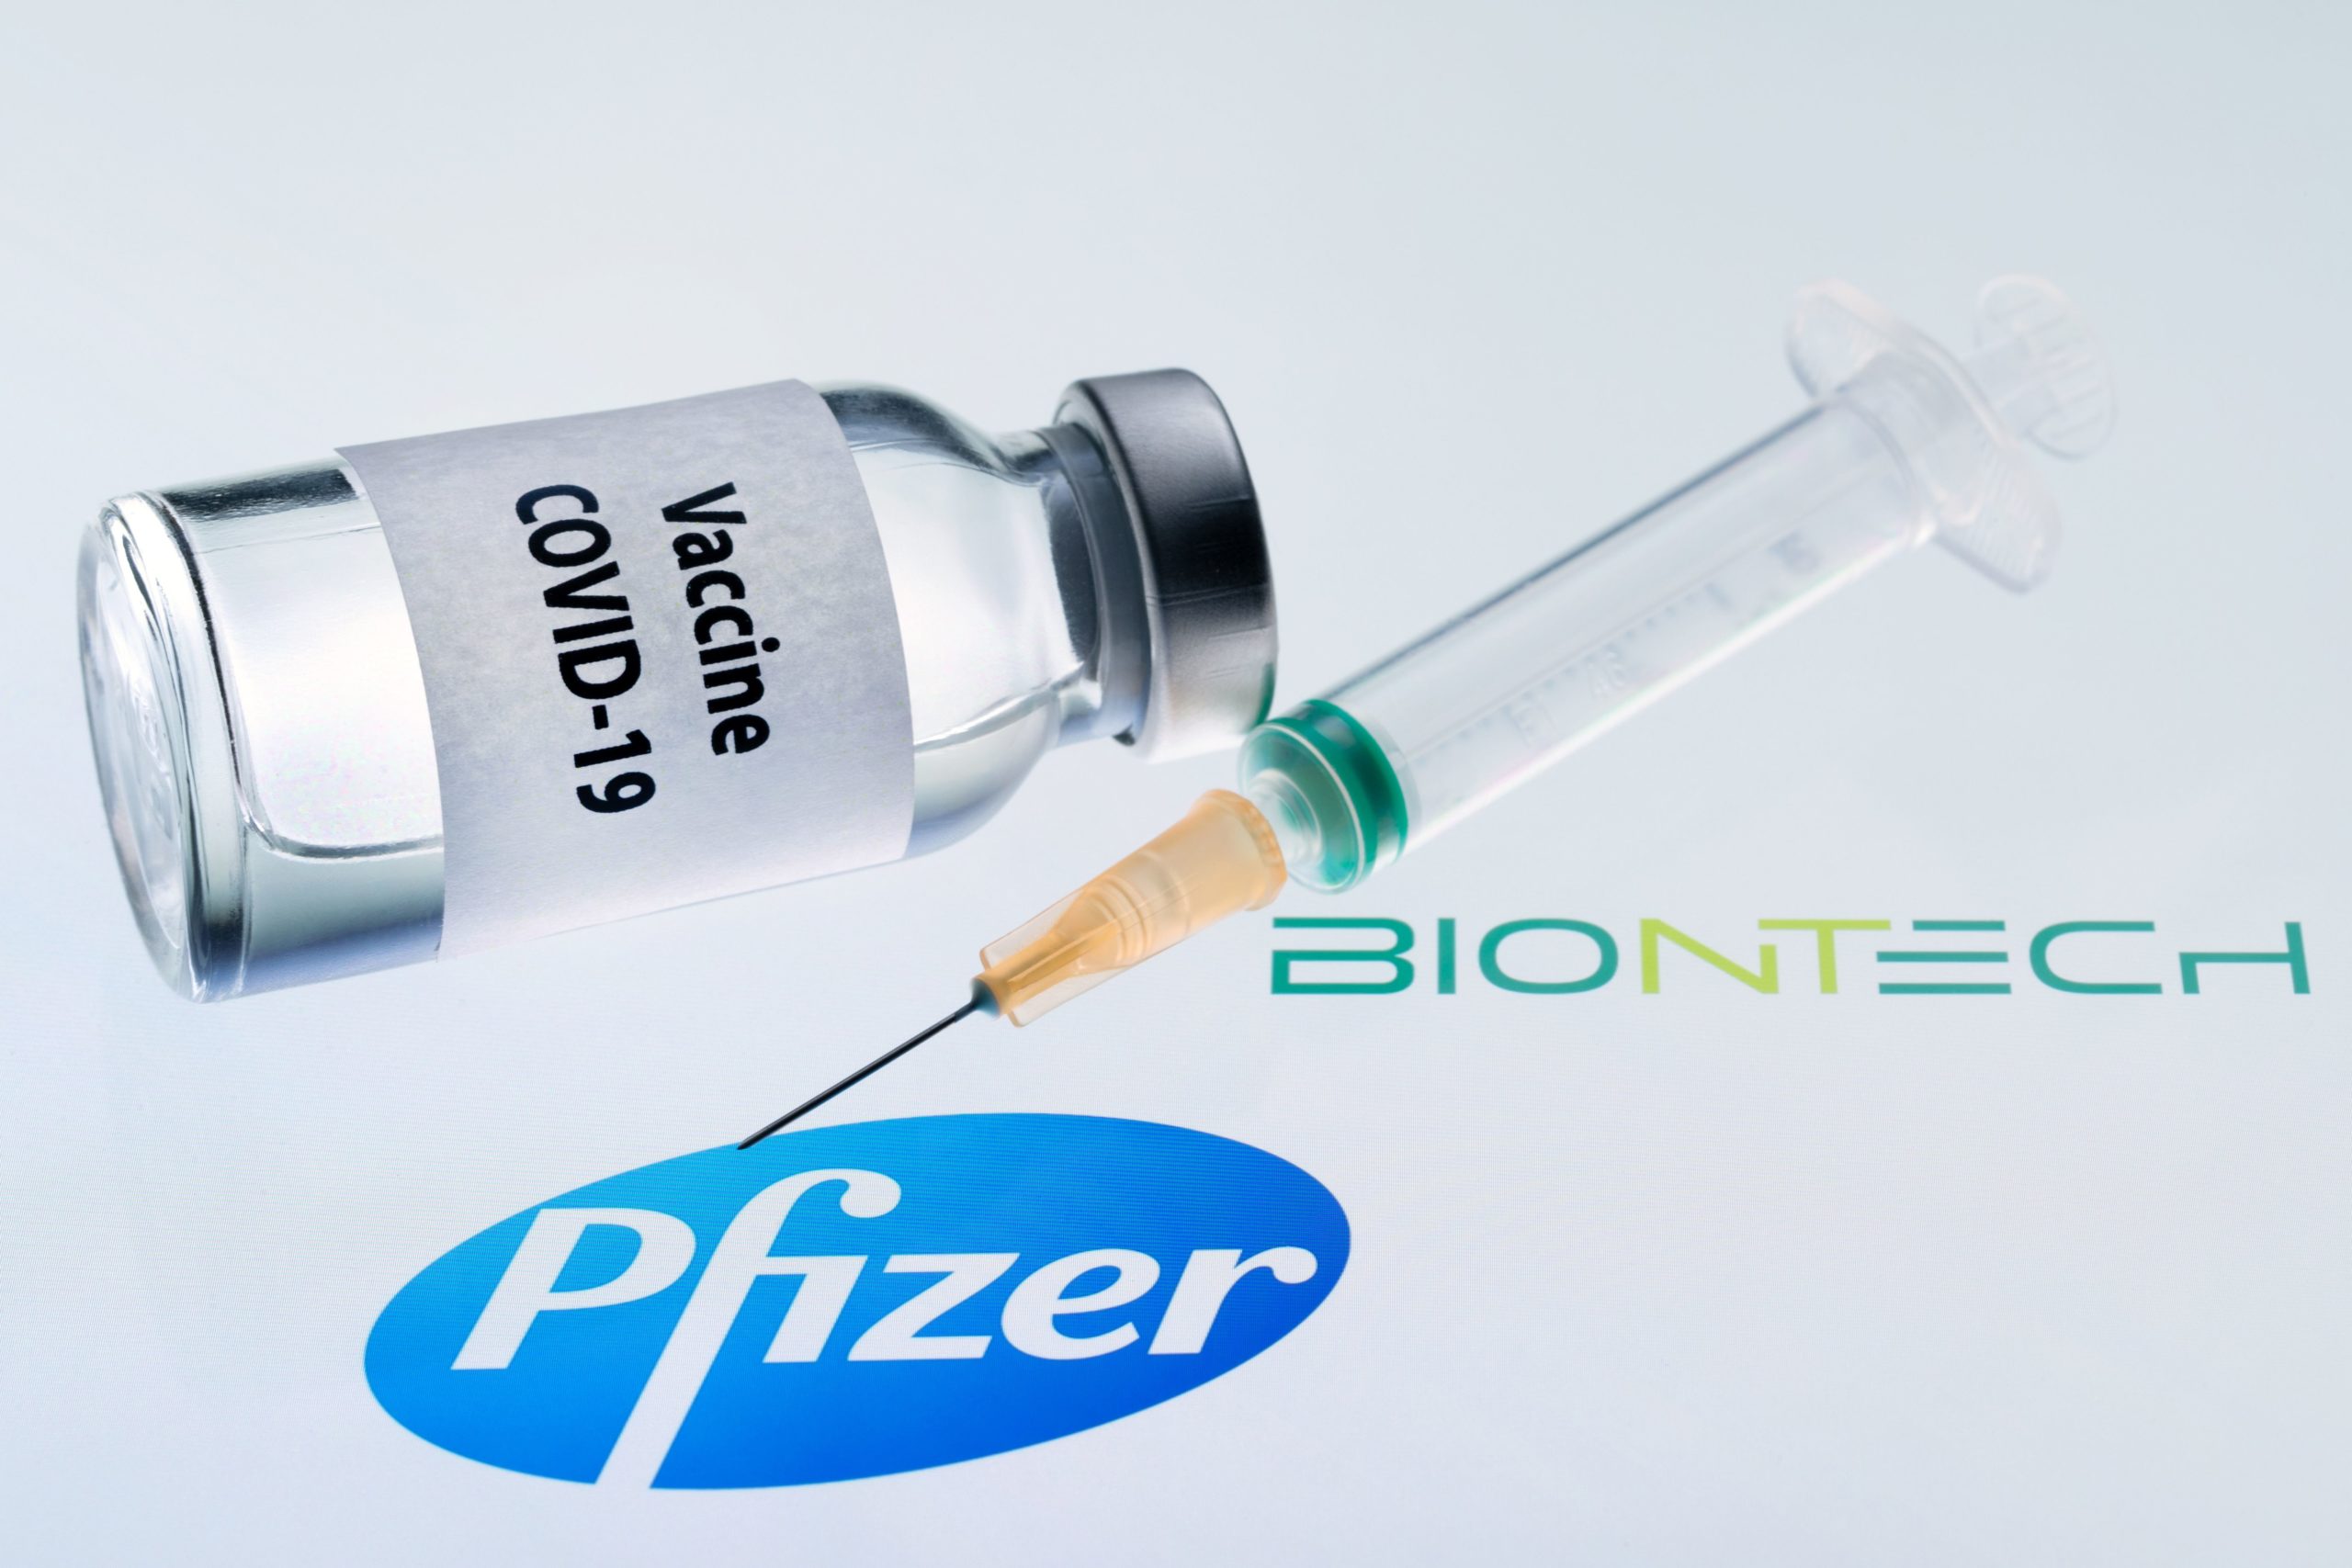 This illustration picture taken on November 23, 2020 shows a bottle reading "Vaccine Covid-19" and a syringe next to the Pfizer and Biontech logo. - The European Commission has signed five contracts to pre-order vaccines, among which with the U.S.-German company Pfizer-BioNTech (up to 300 million doses). (JOEL SAGET/AFP via Getty Images)